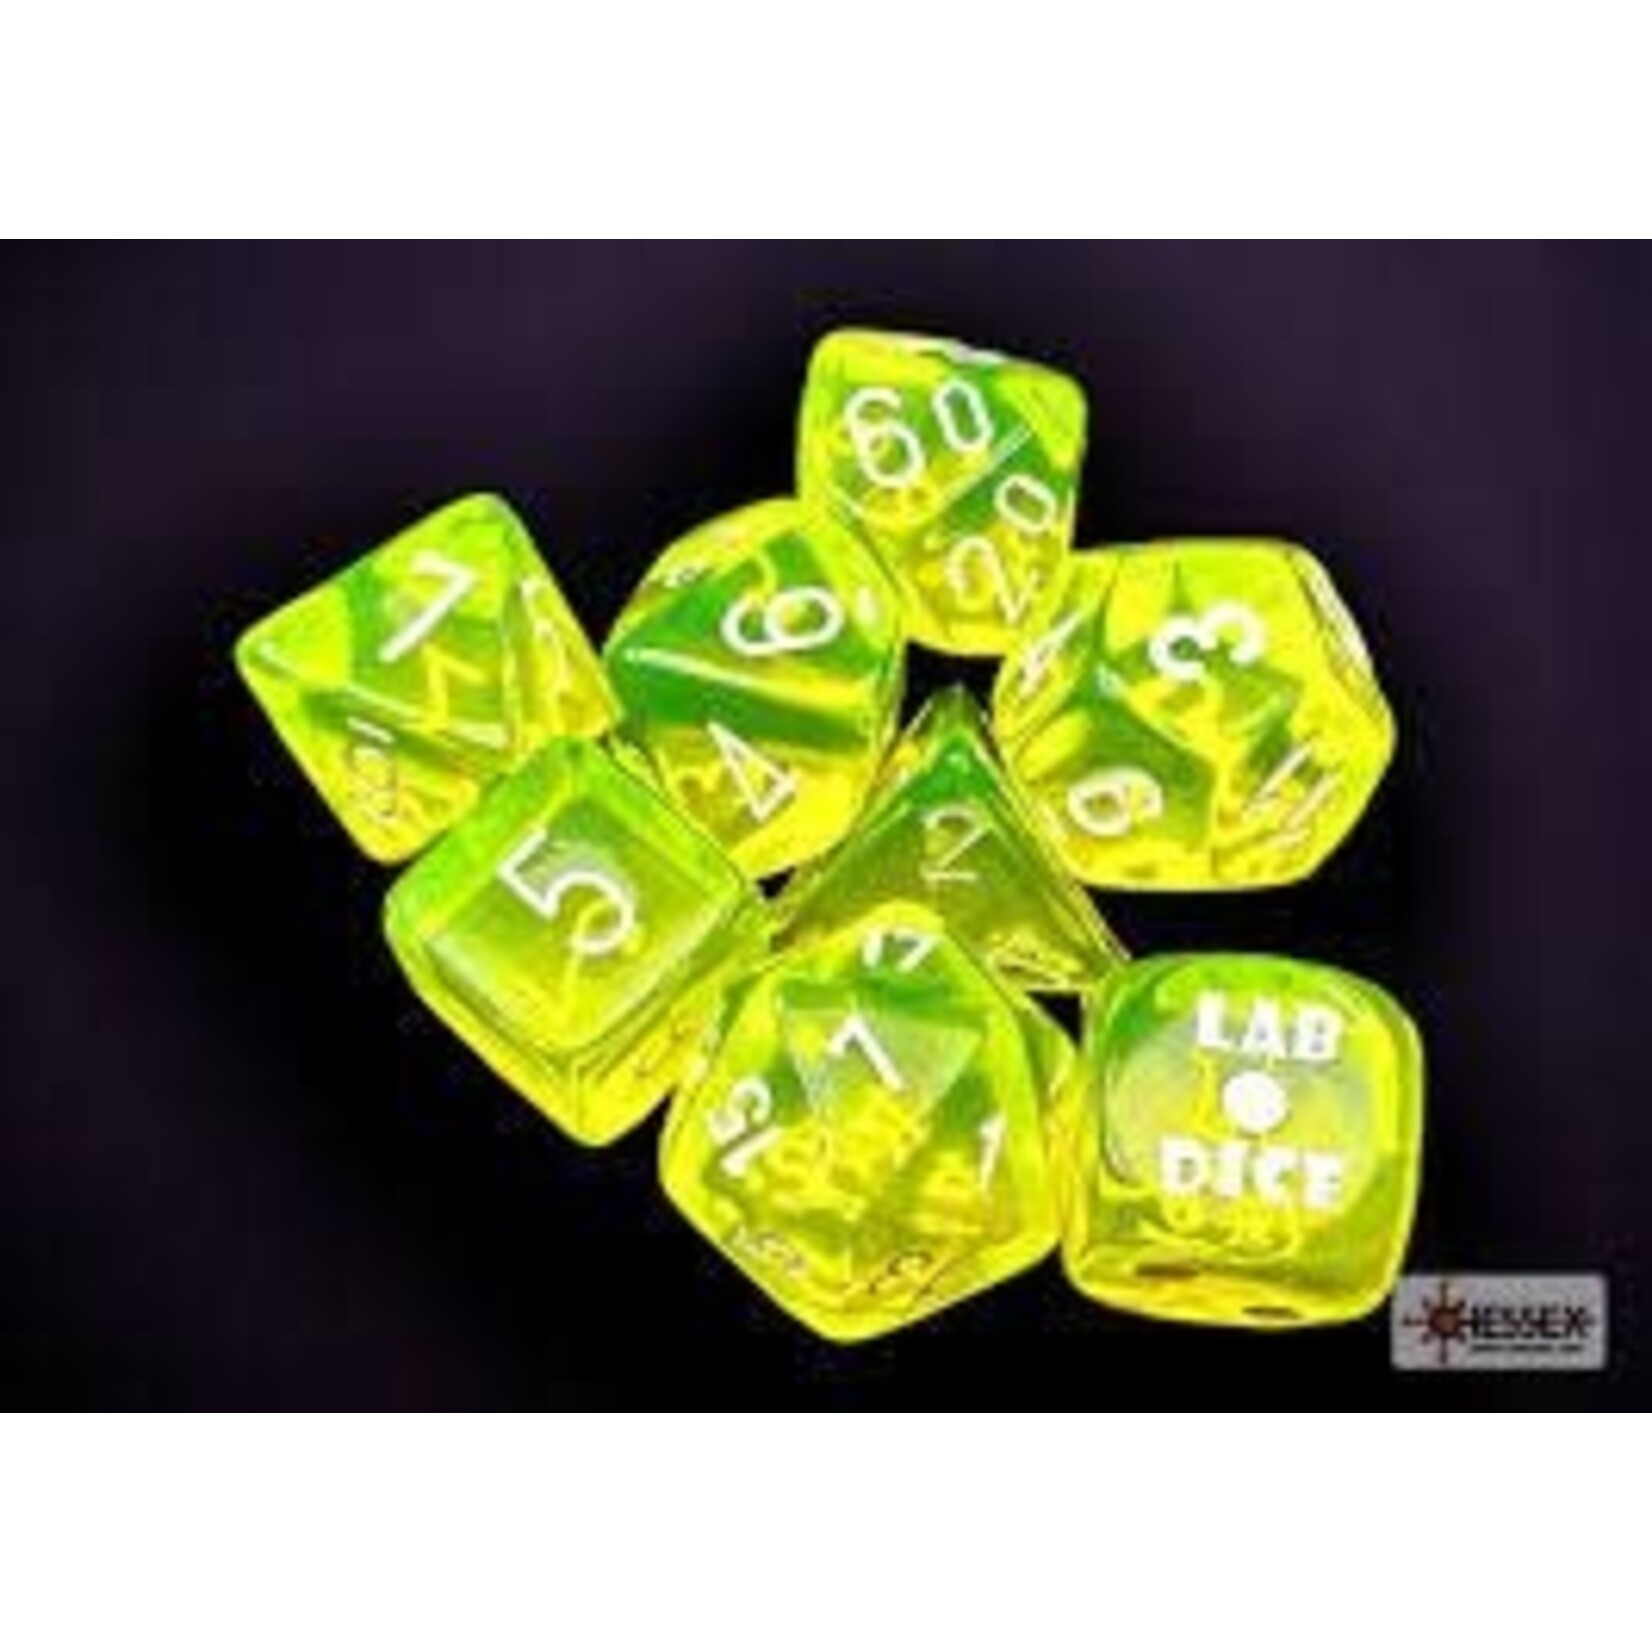 Chessex Chessex Lab Dice Translucent Neon Yellow With White (7) Set